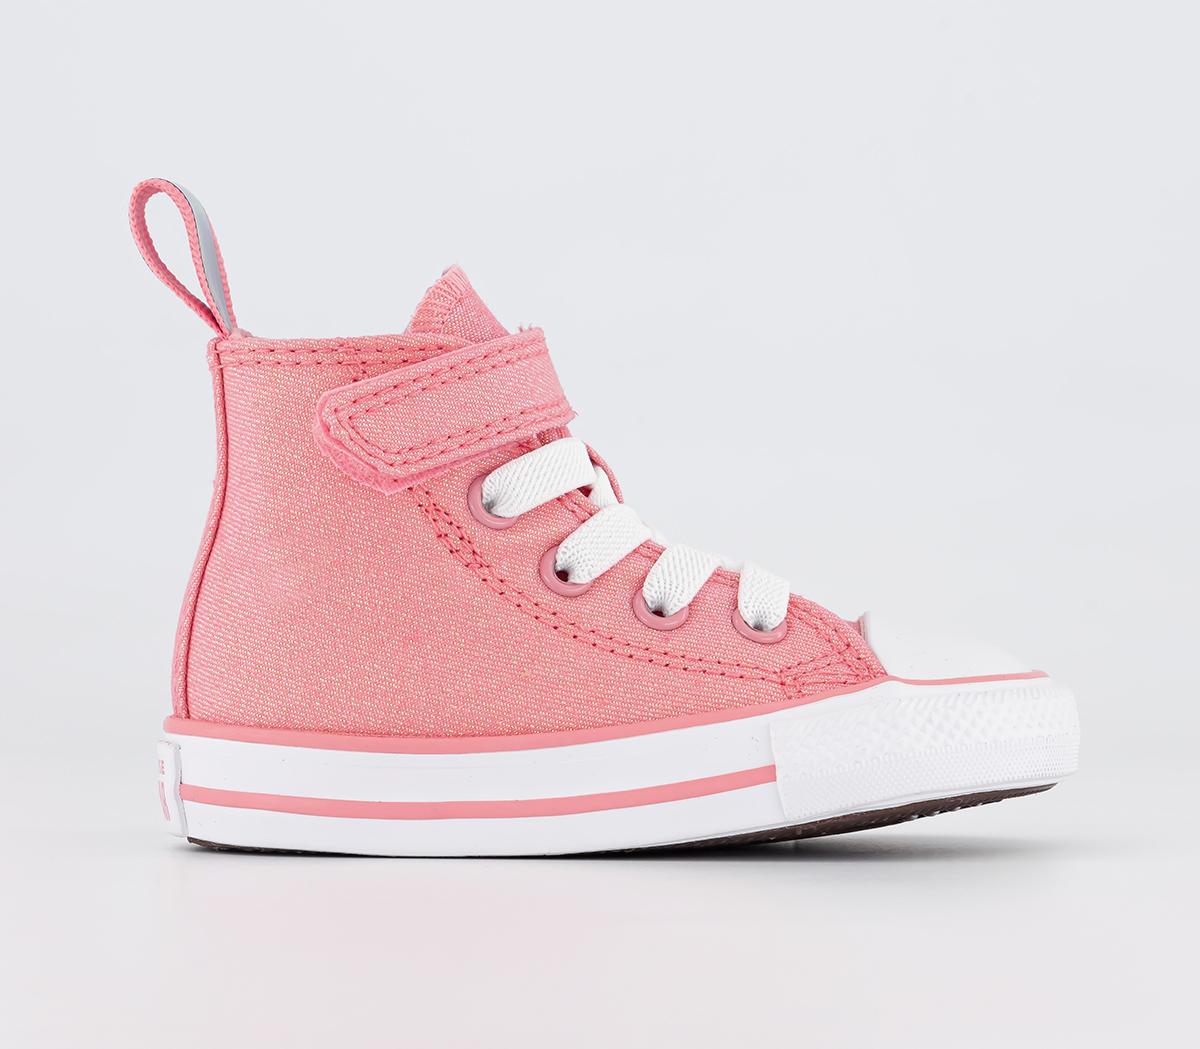 ConverseAll Star Hi 1vlace Trainers Lawn Flamingo White White